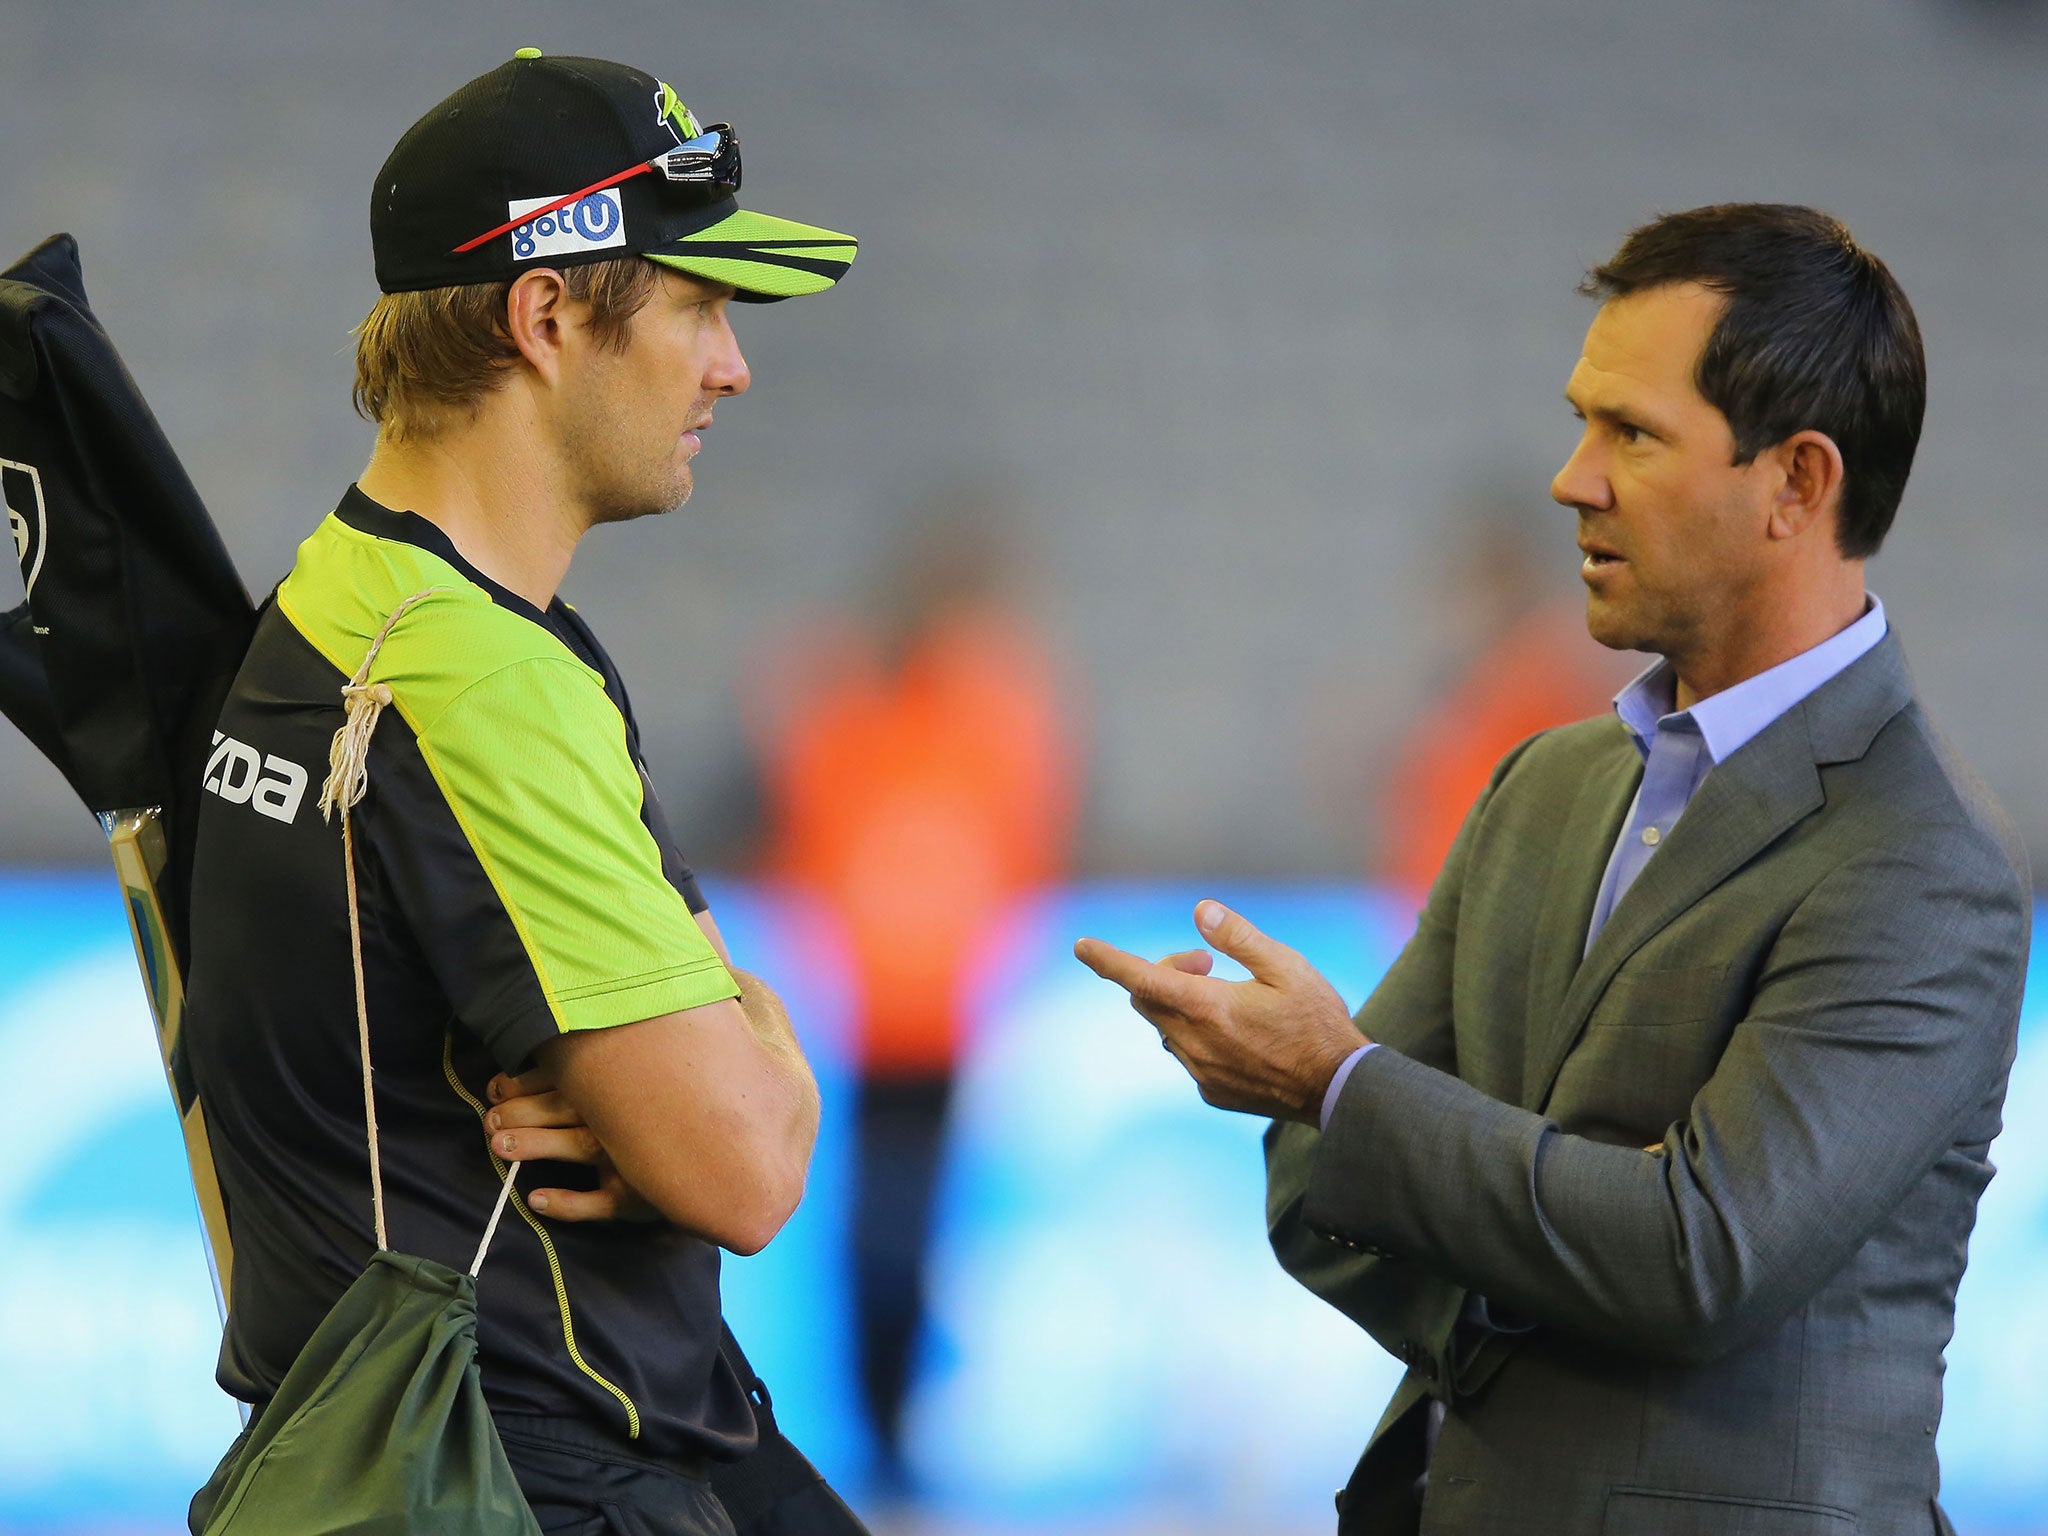 Former test captain and now Channel Ten Big Bash commentator Ricky Ponting with Shane Watson